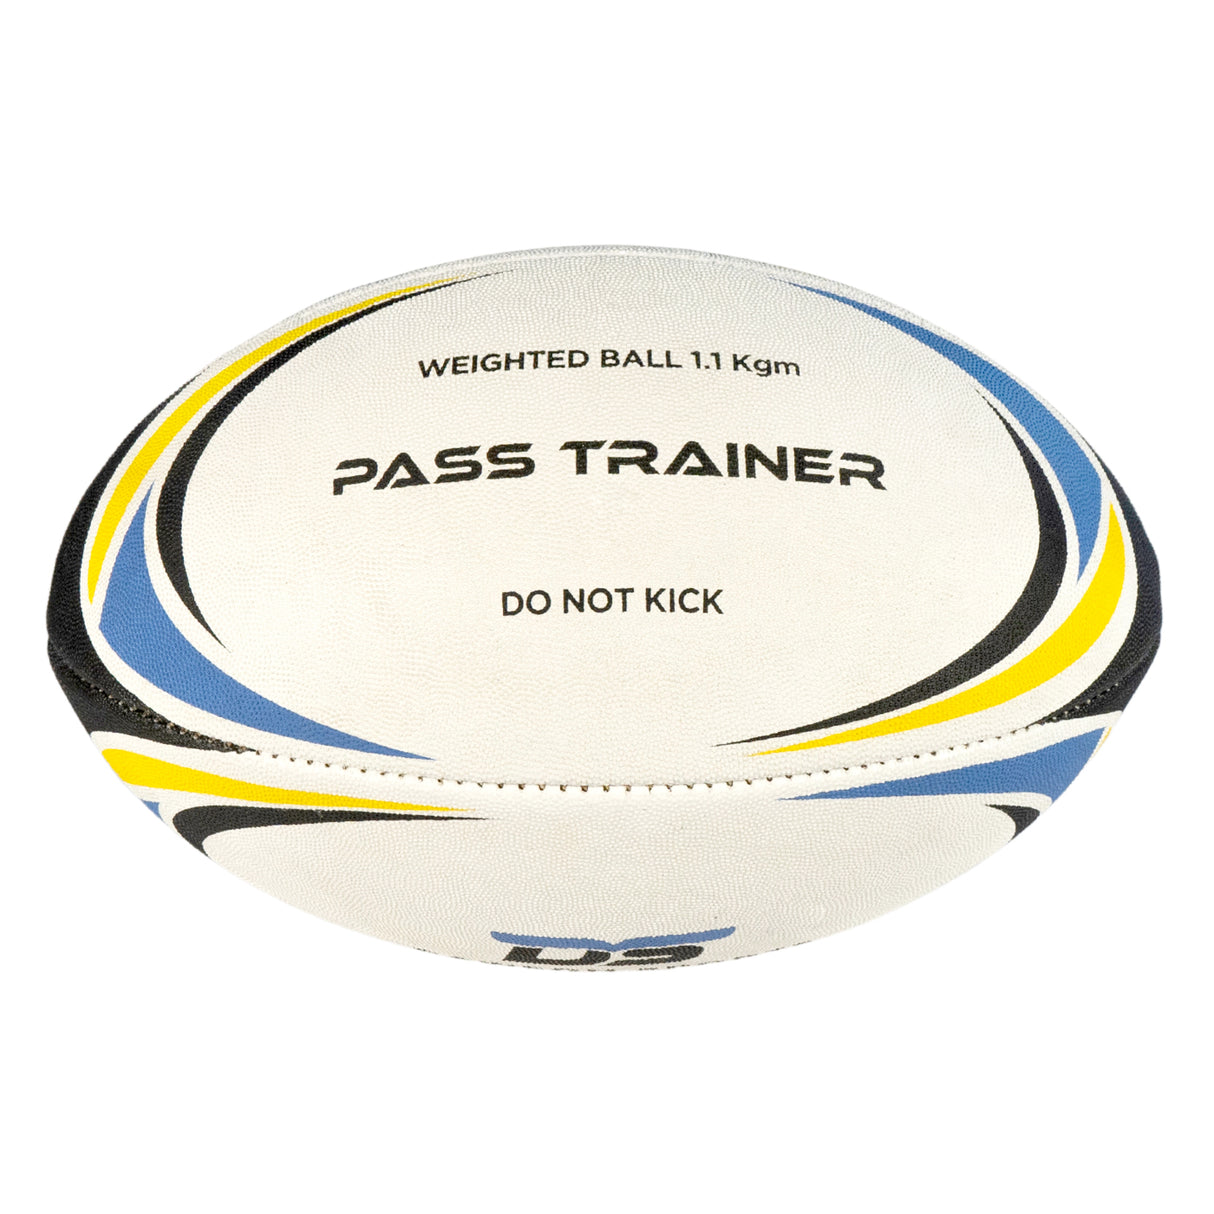 DS Pass Developers Rugby Ball - Size 5